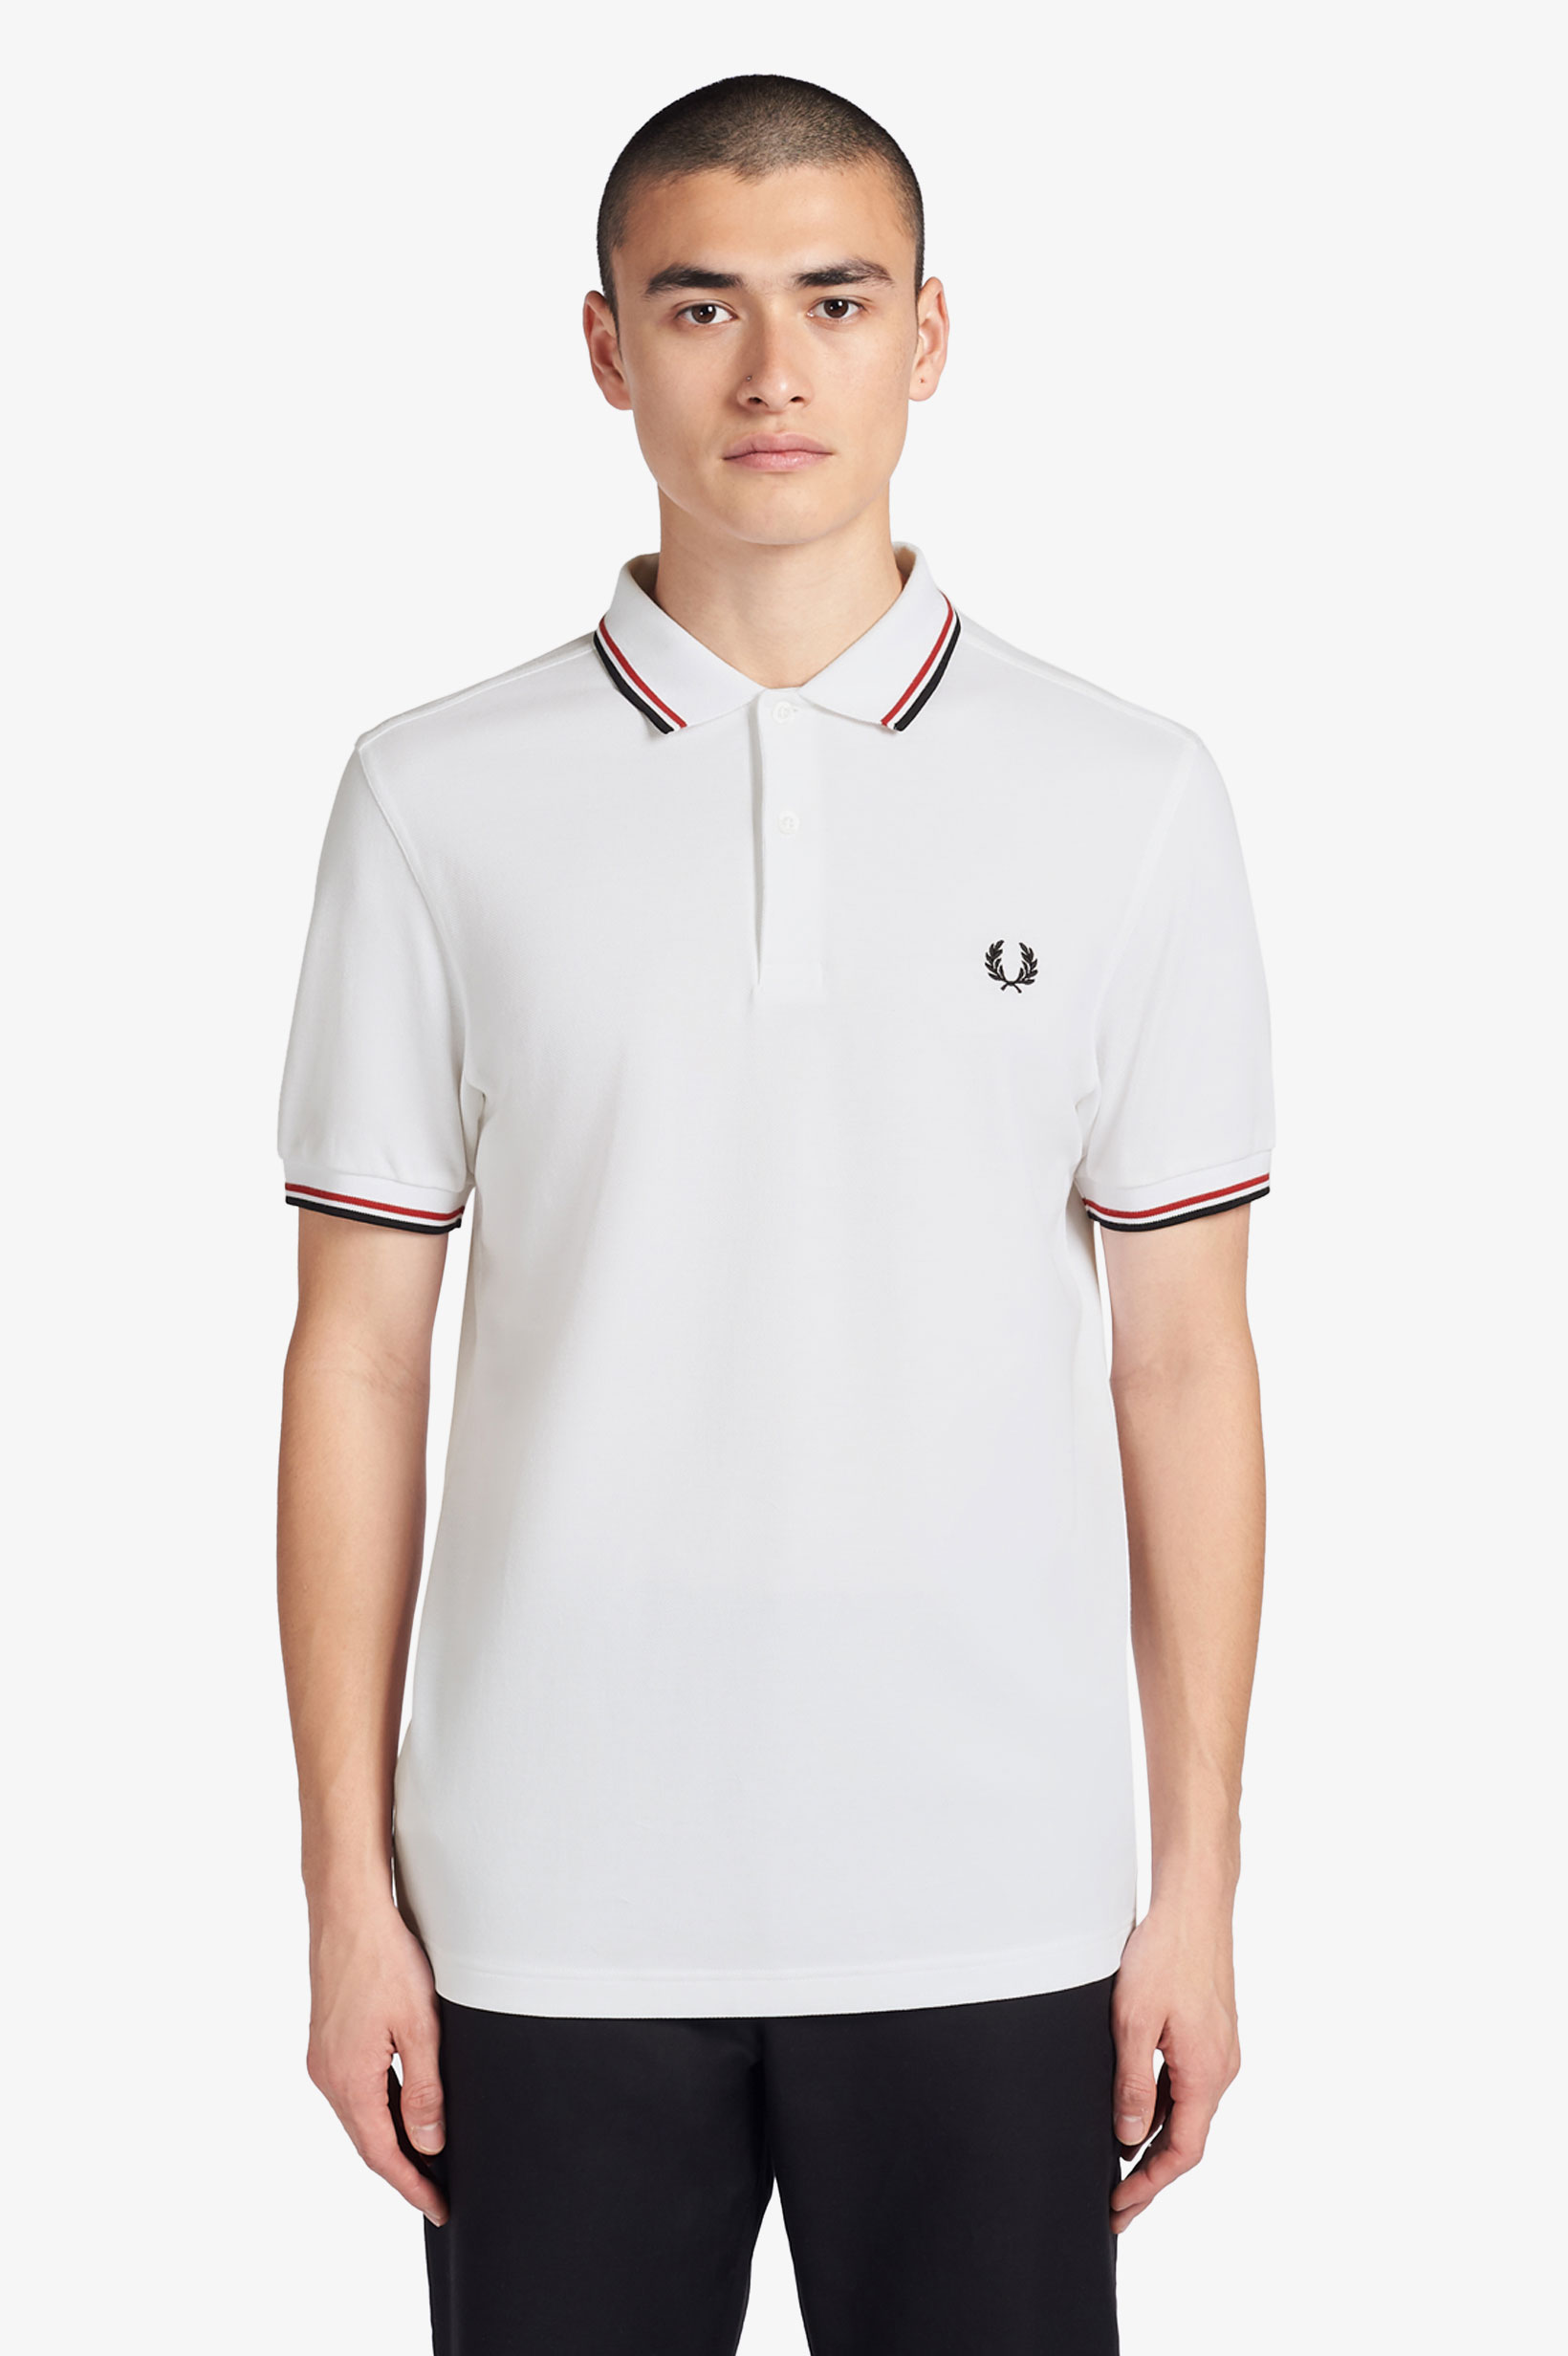 Fred Perry - TWIN TIPPED POLO SHIRT - White/Bright Red/Navy